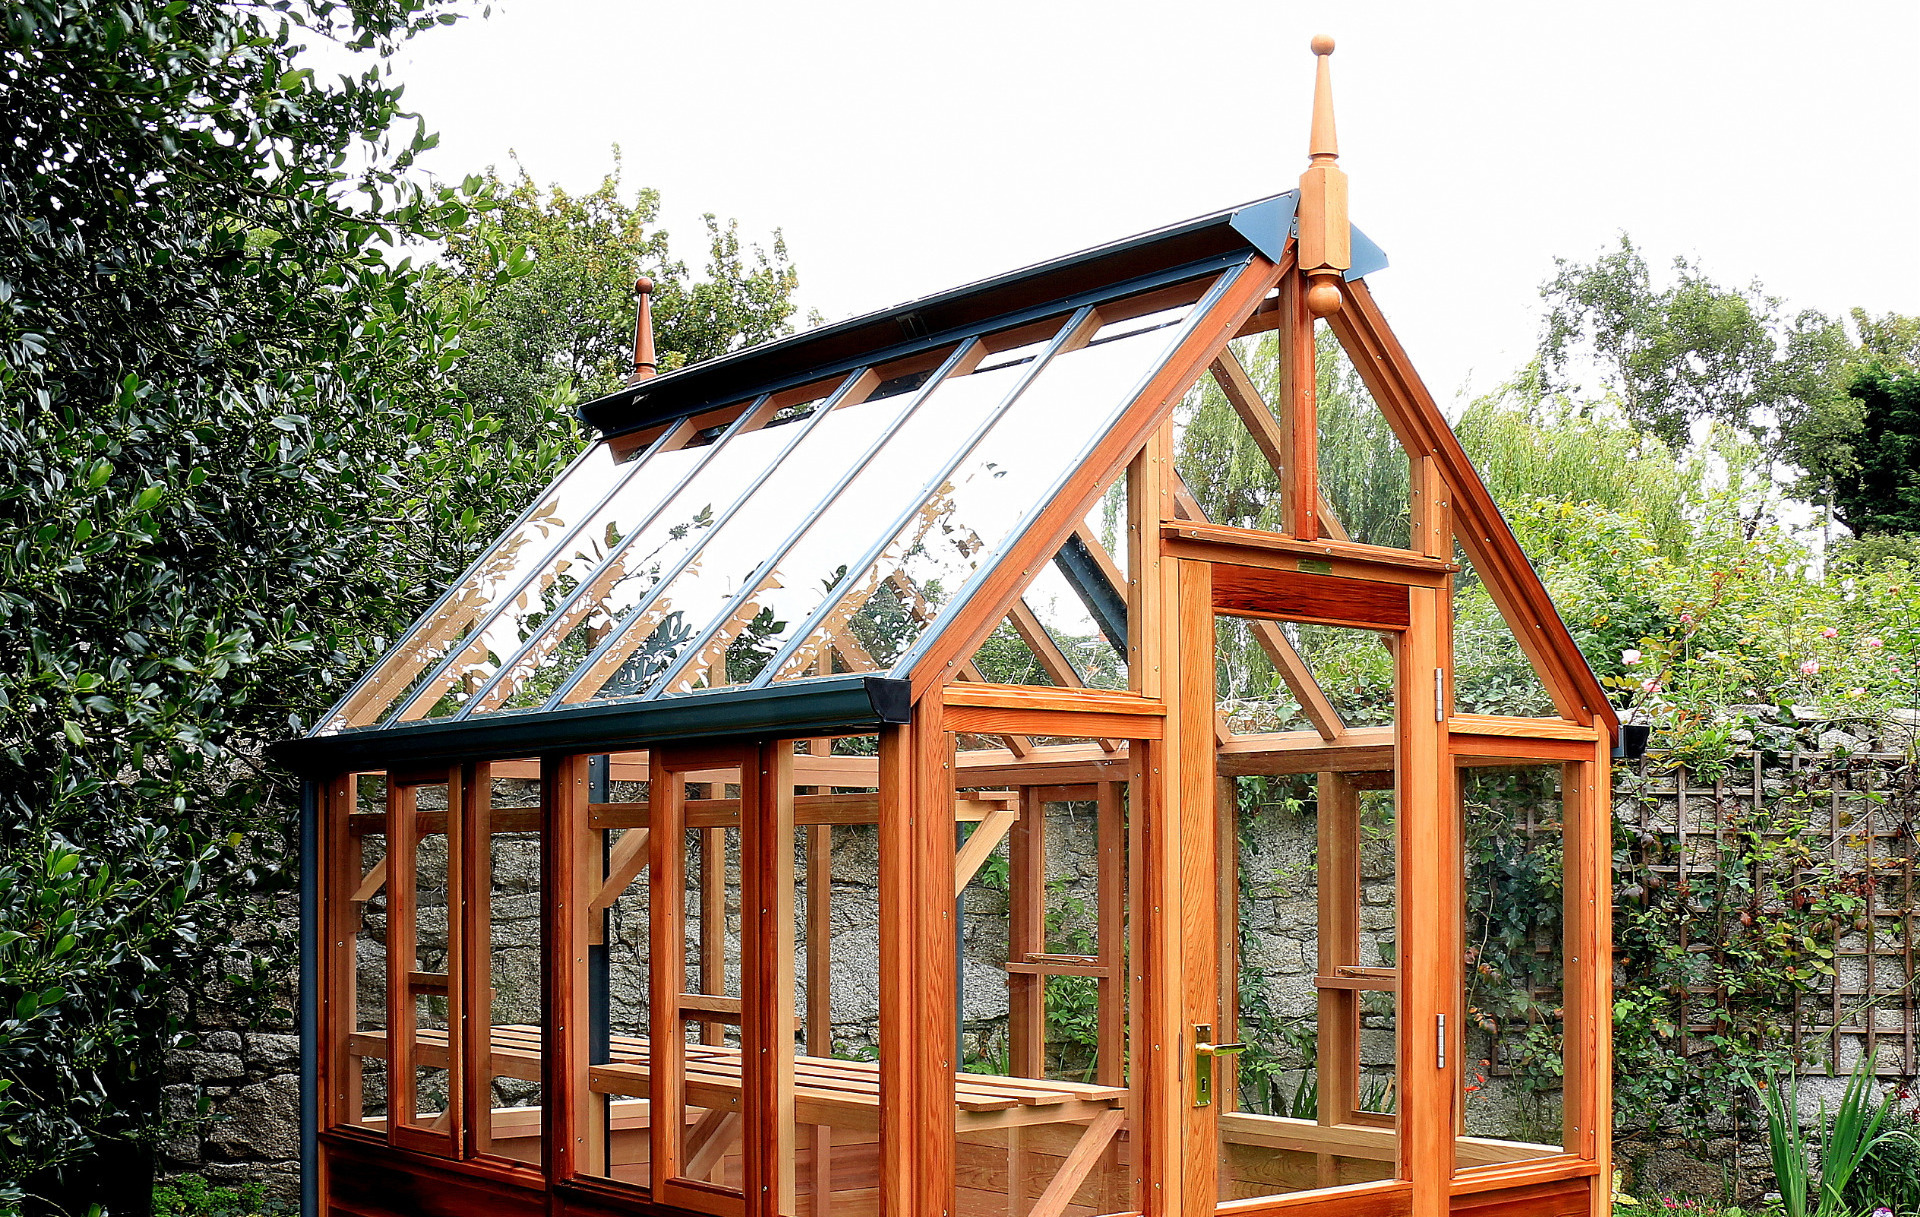 RHS Rosemoor - an ideal compact size Victorian greenhouse for kitchen gardening